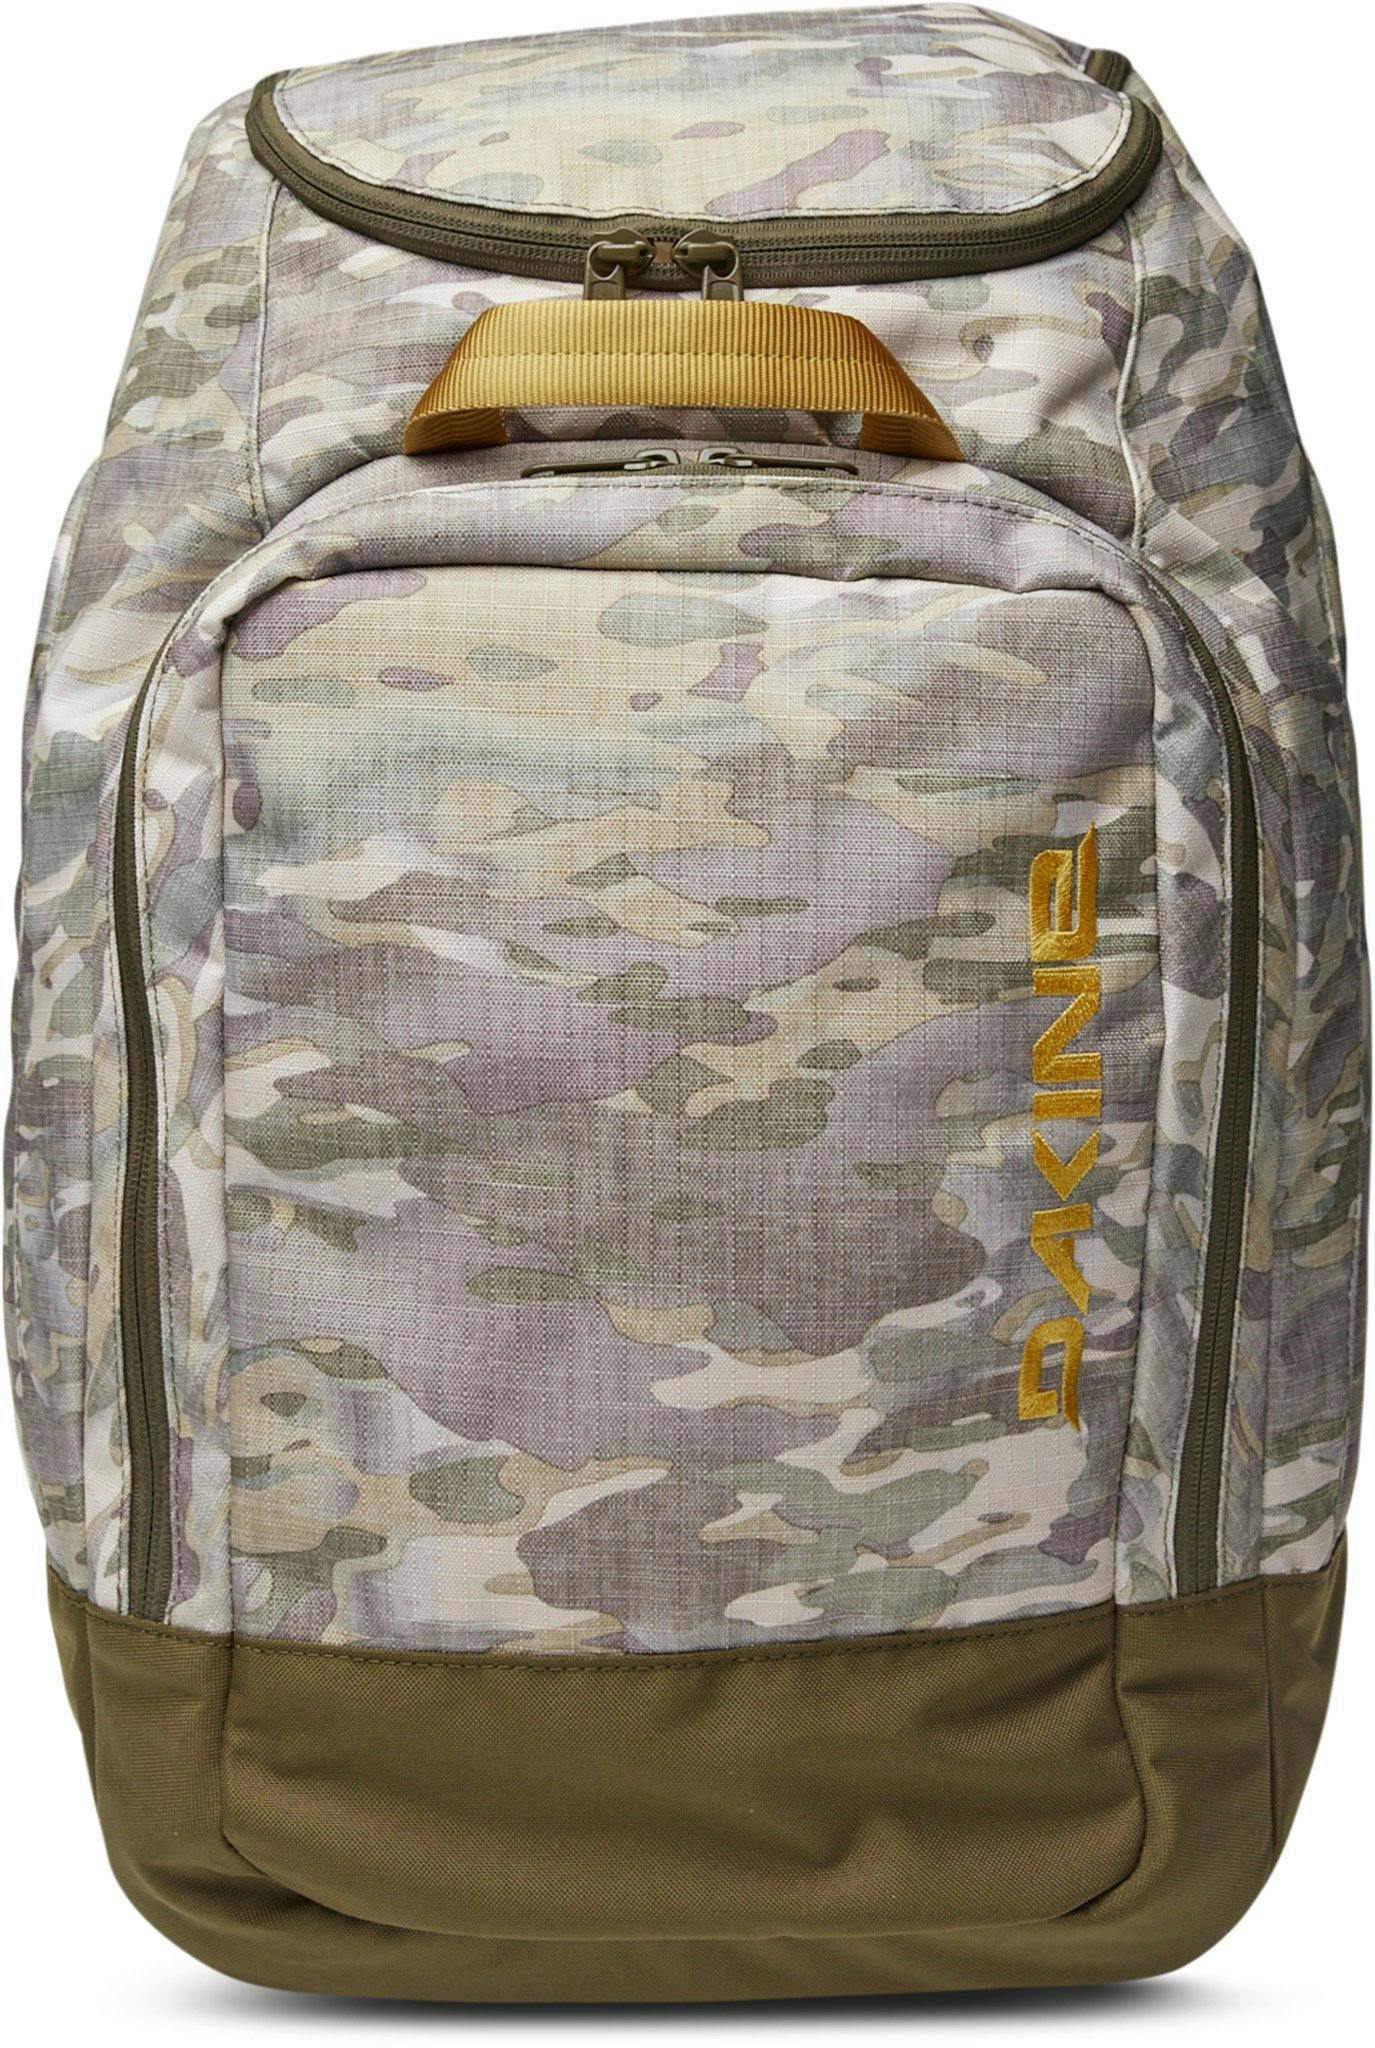 Product image for Boot Pack Backpack 50L